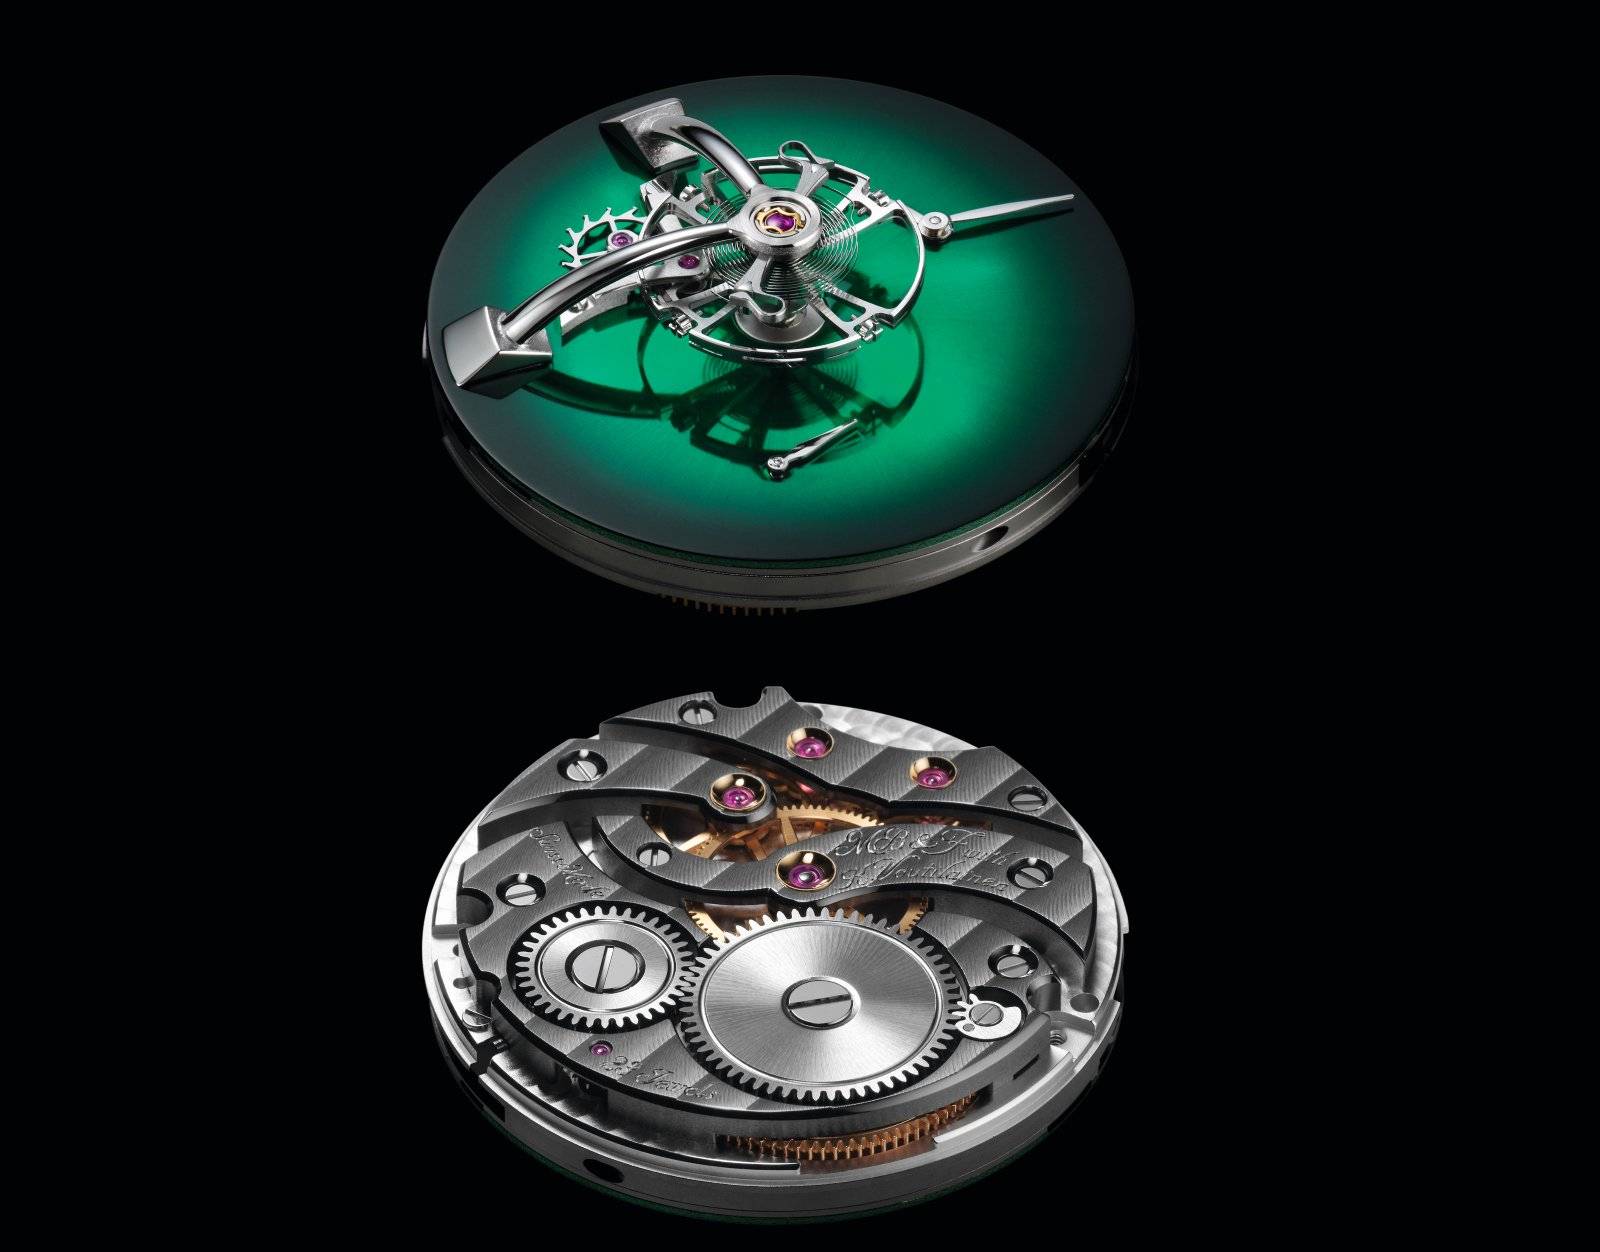 H. Moser & Cie. × MB&F